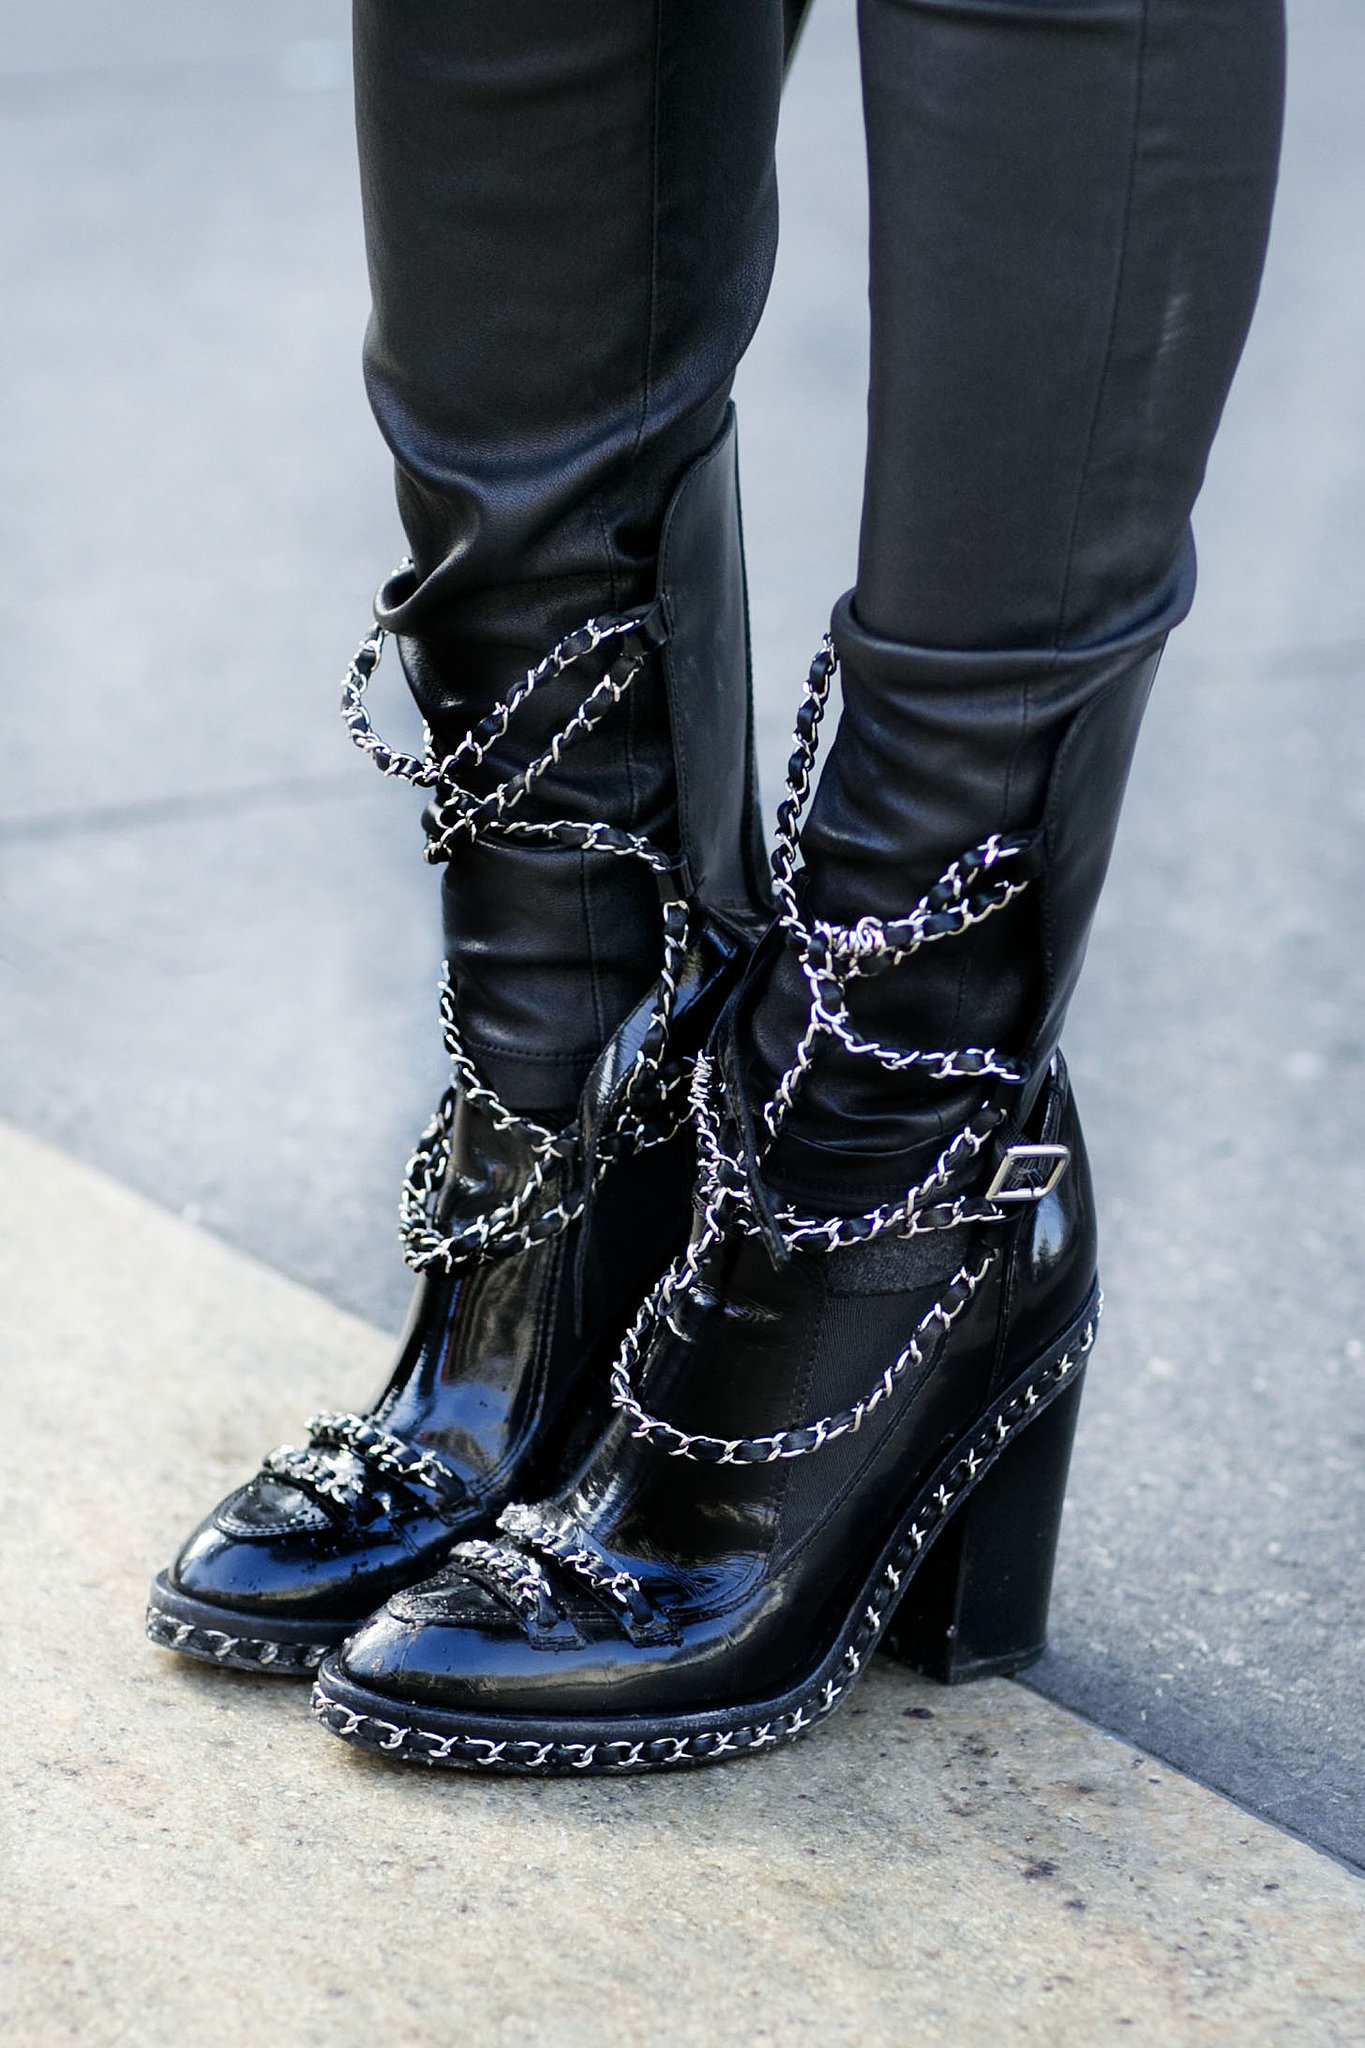 Heavy chains on these Chanel Fall 2013 boots were so rock and roll. 
Source: Tim Regas
